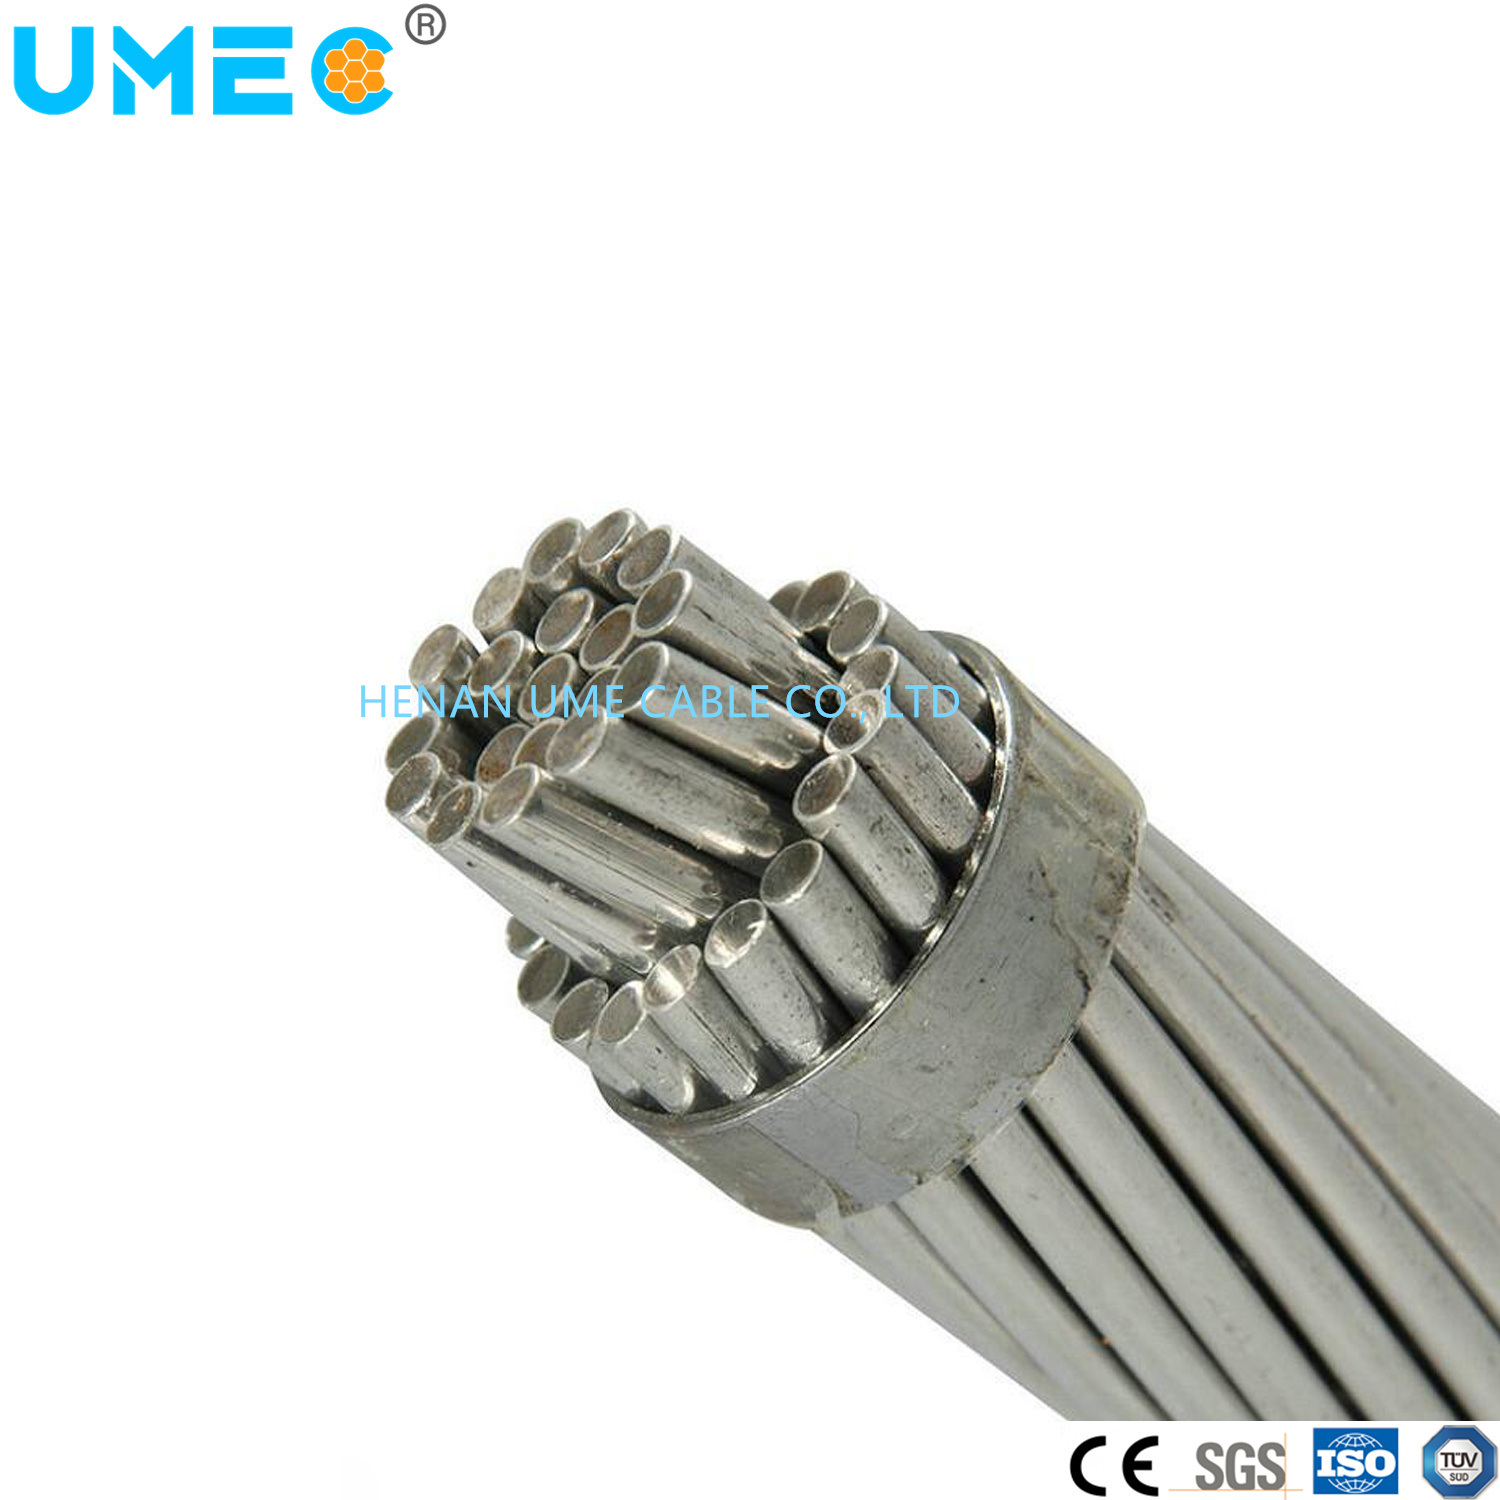 Electric Protection of Overhead Power Lines Acs (Aluminium Clad Steel) Rods 3.26mm 2.91mm Electrical Acs